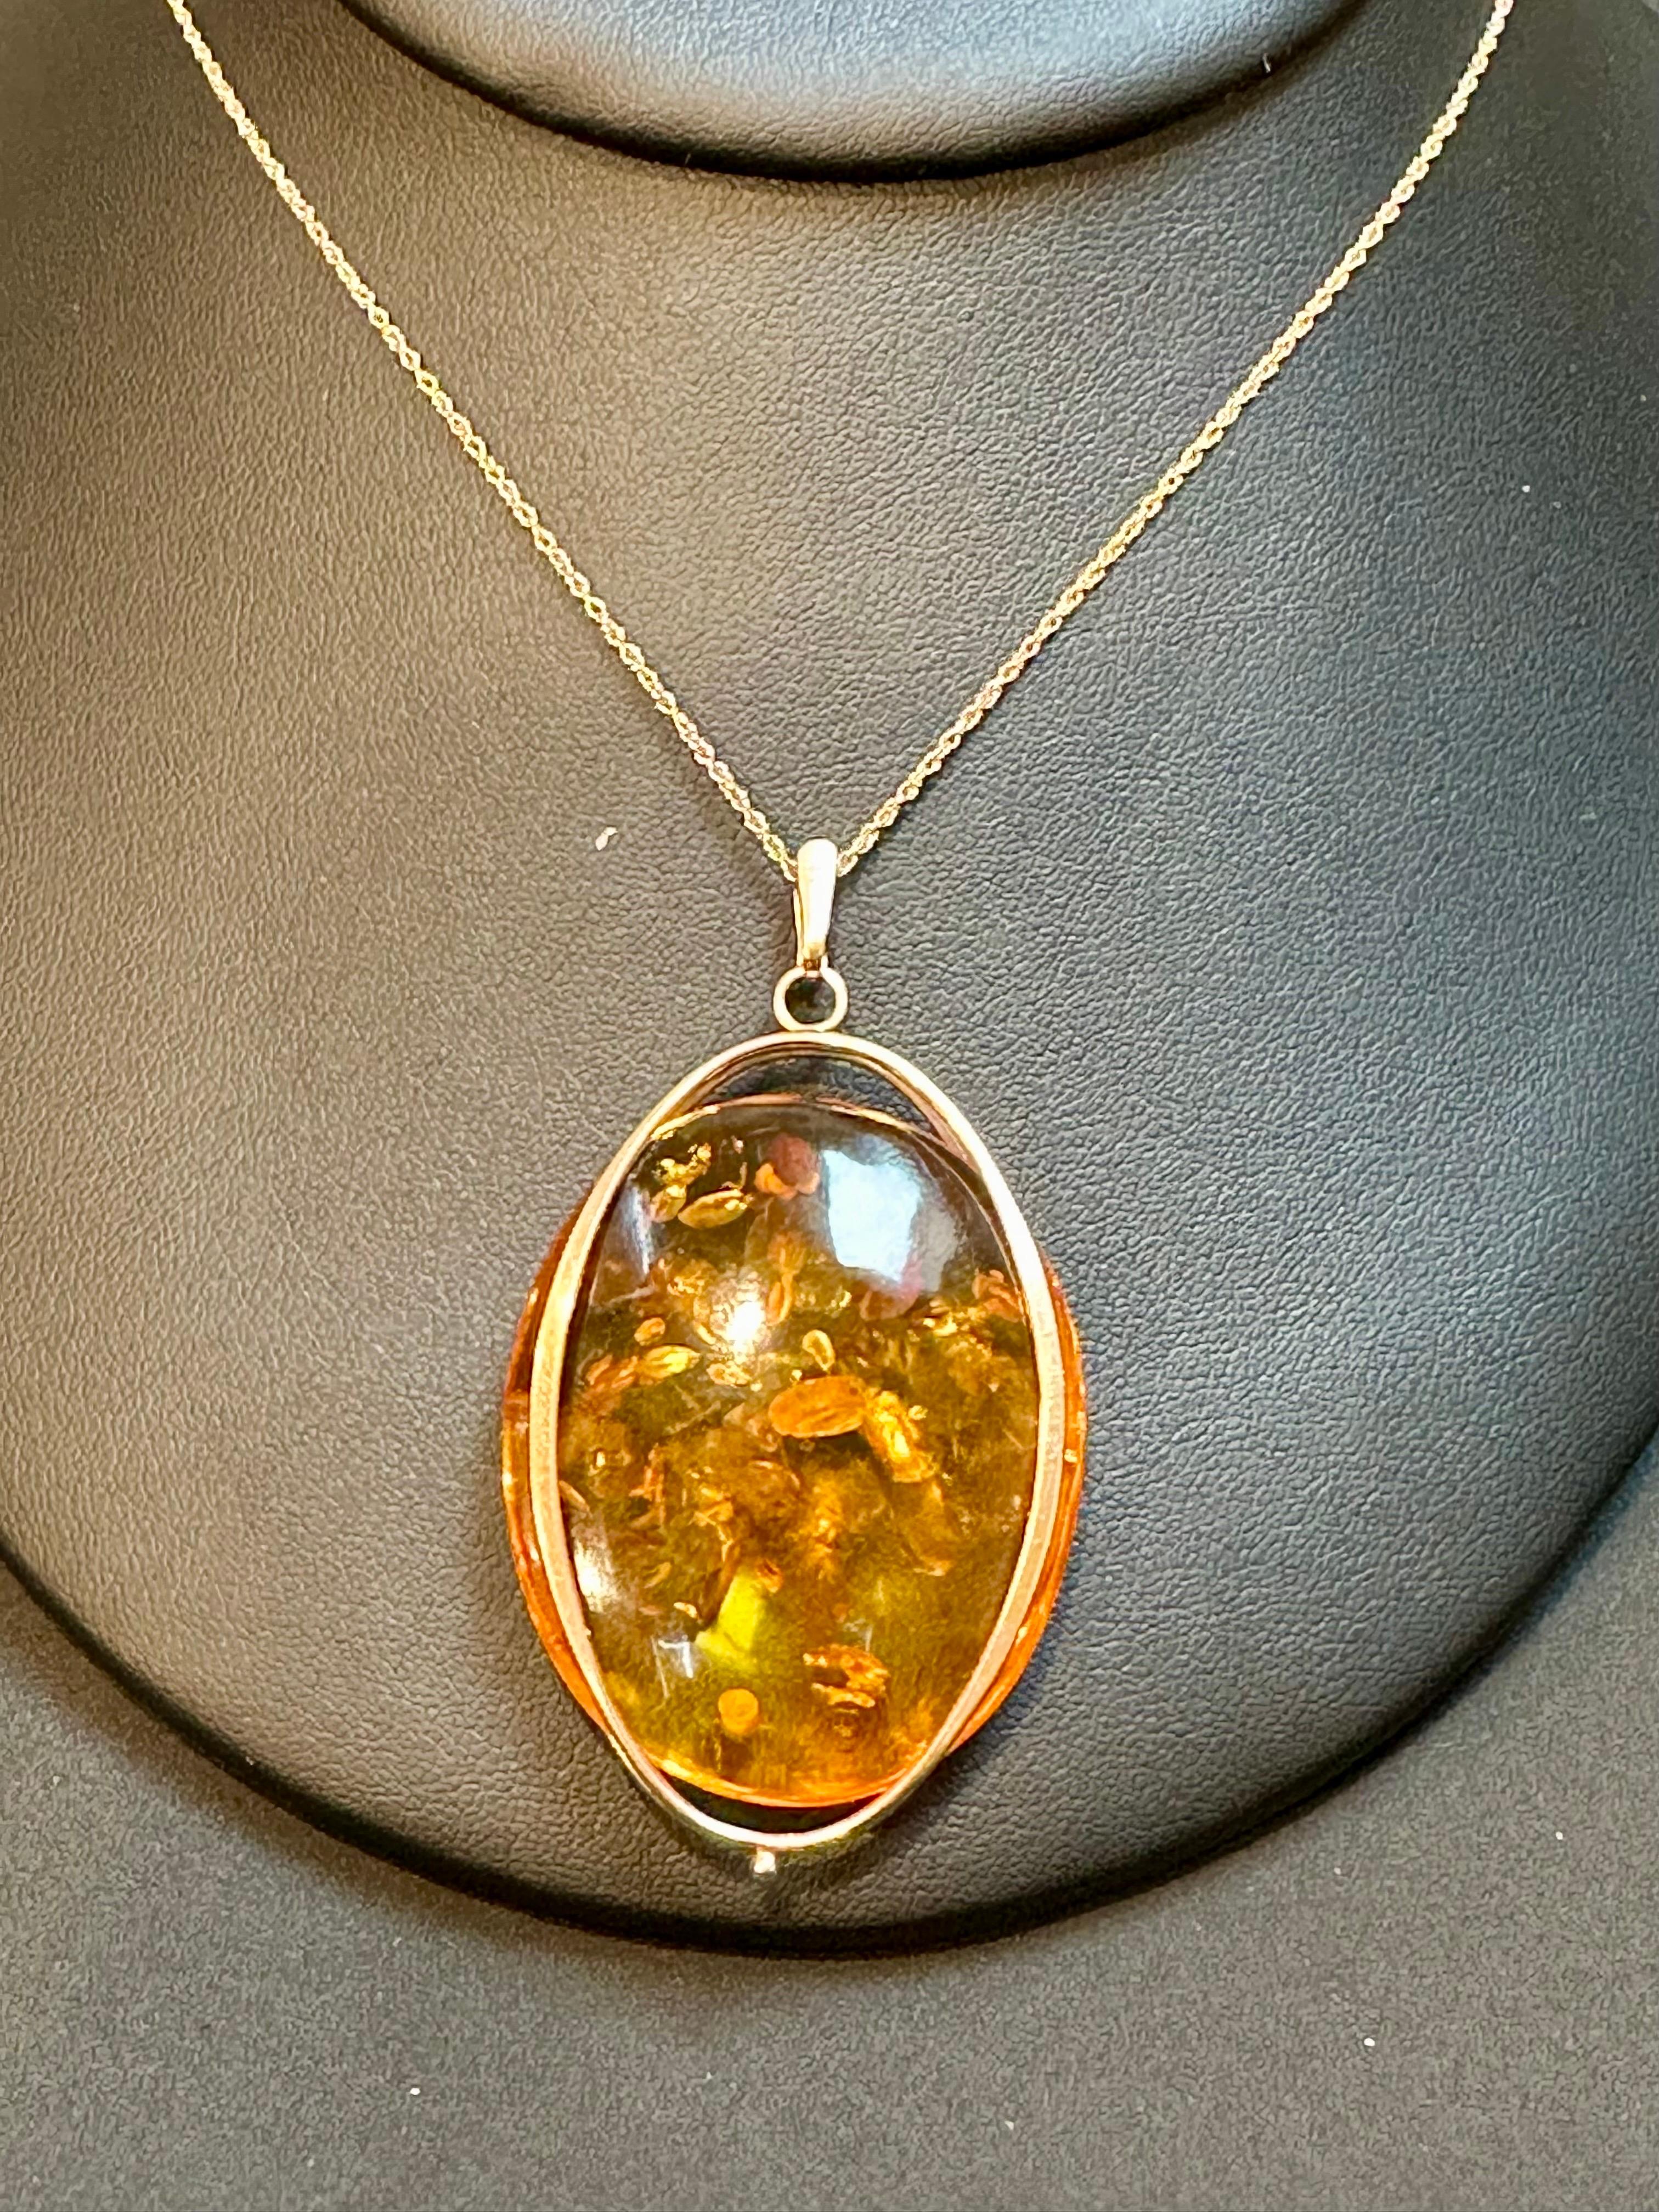 Women's Large Natural Russian Amber Necklace or Pendant in 14 Karat Yellow Gold + Chain